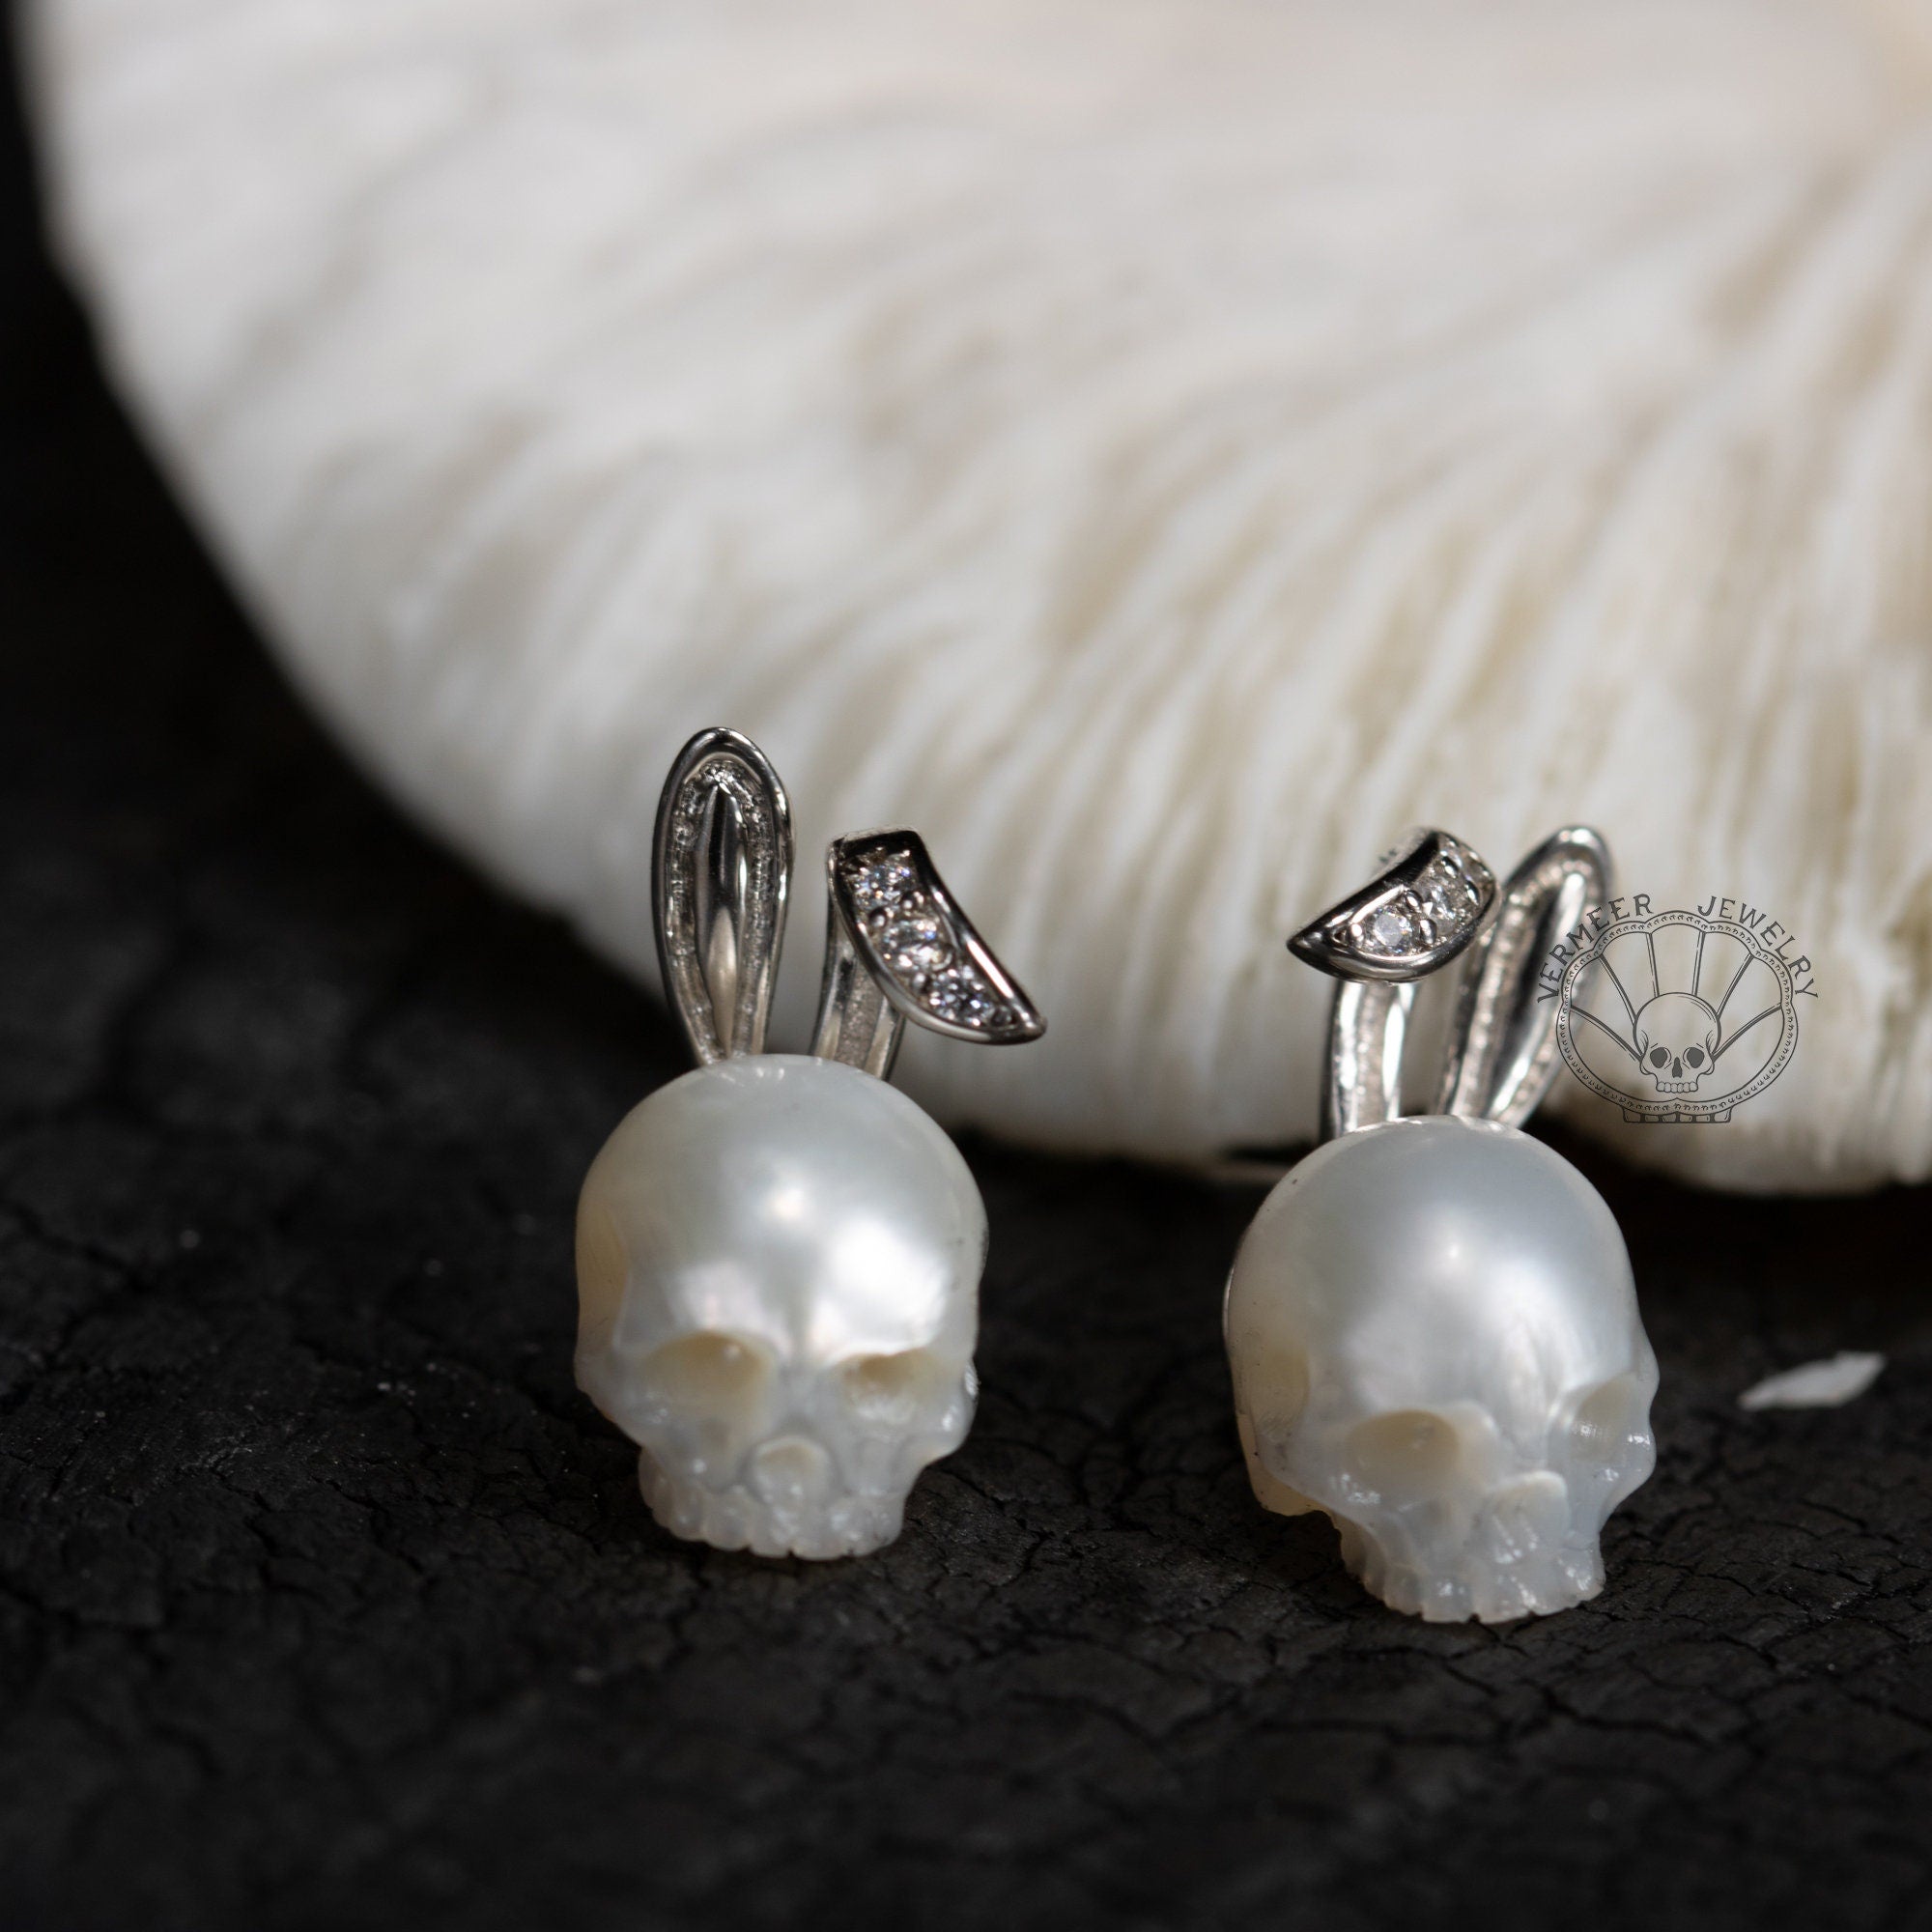 skull carved pearl jewelry little bunny shape cute 925 silver earring necklace gift for halloween